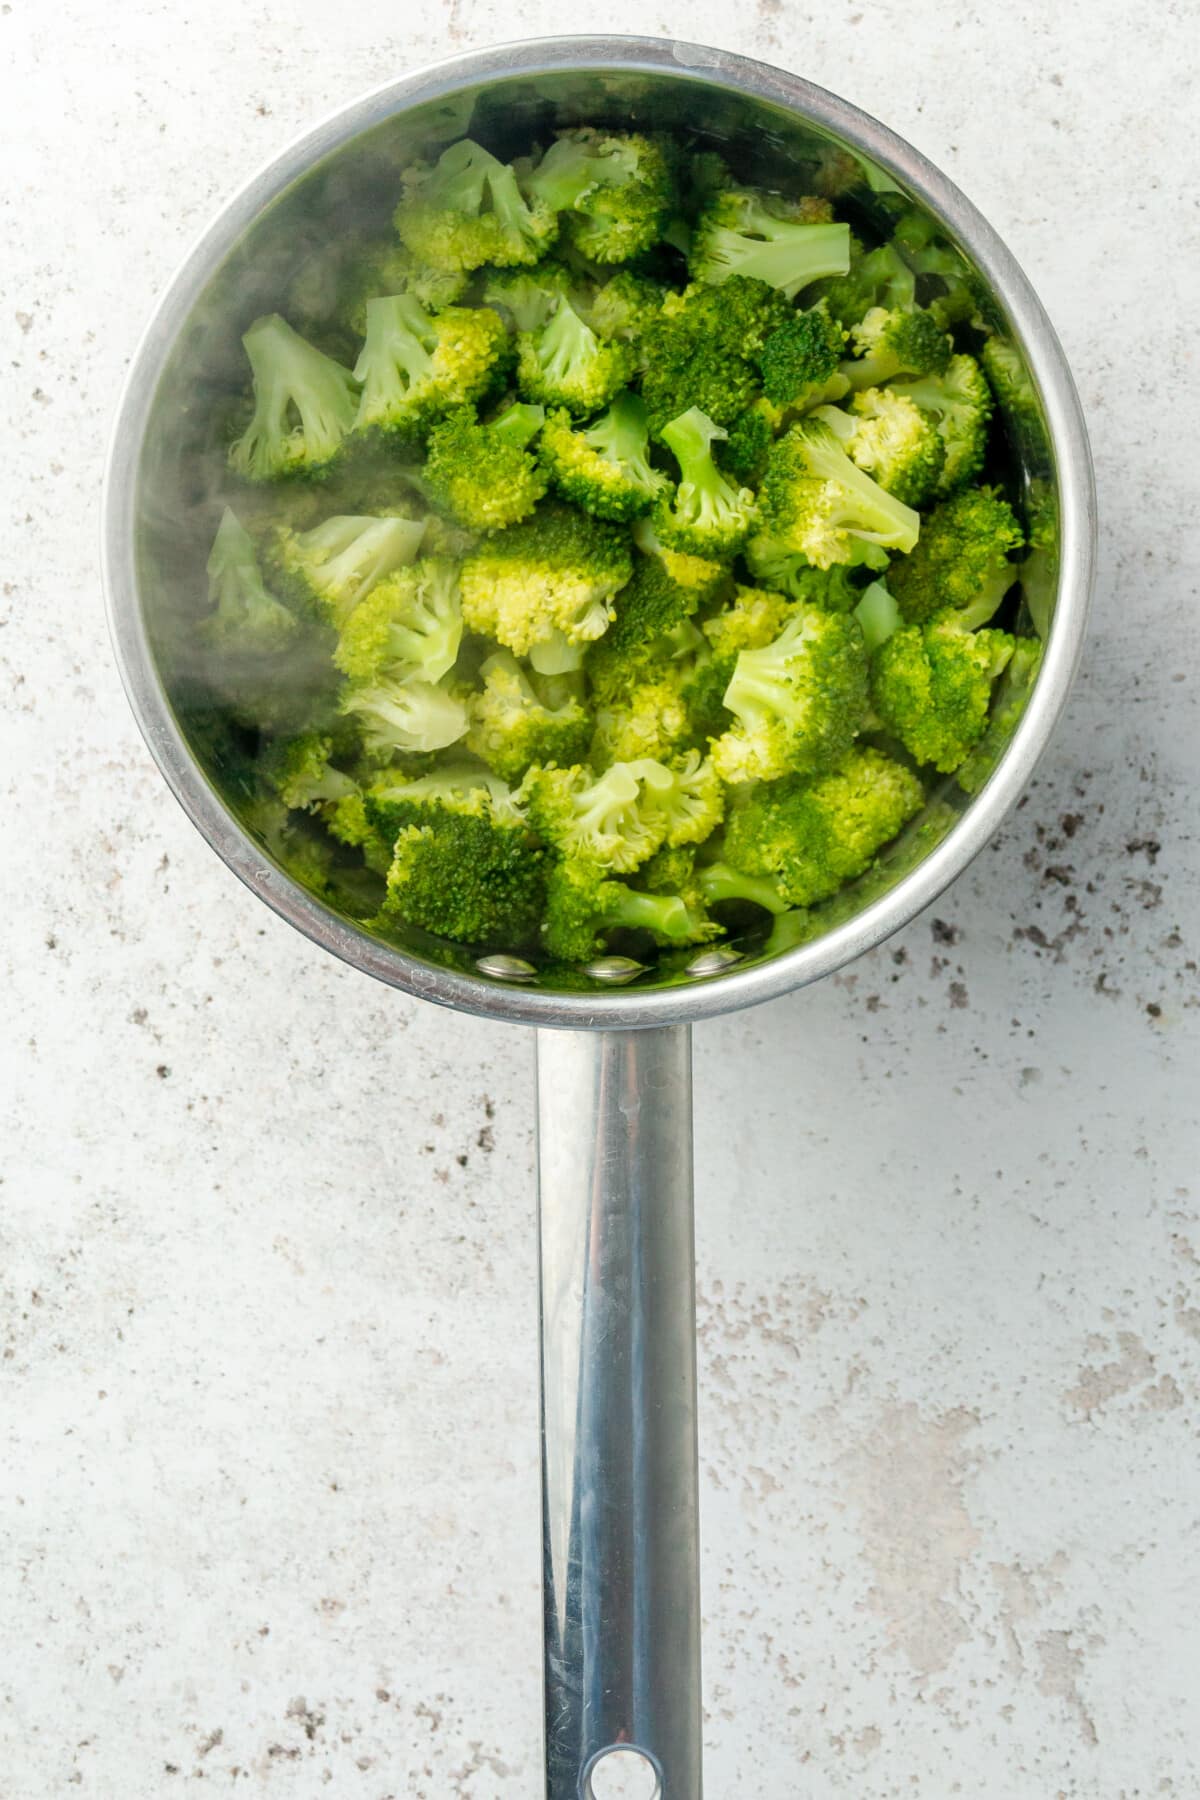 Cooked broccoli florets sit in a saucepan with a little steam coming off on a light grey colored surface.